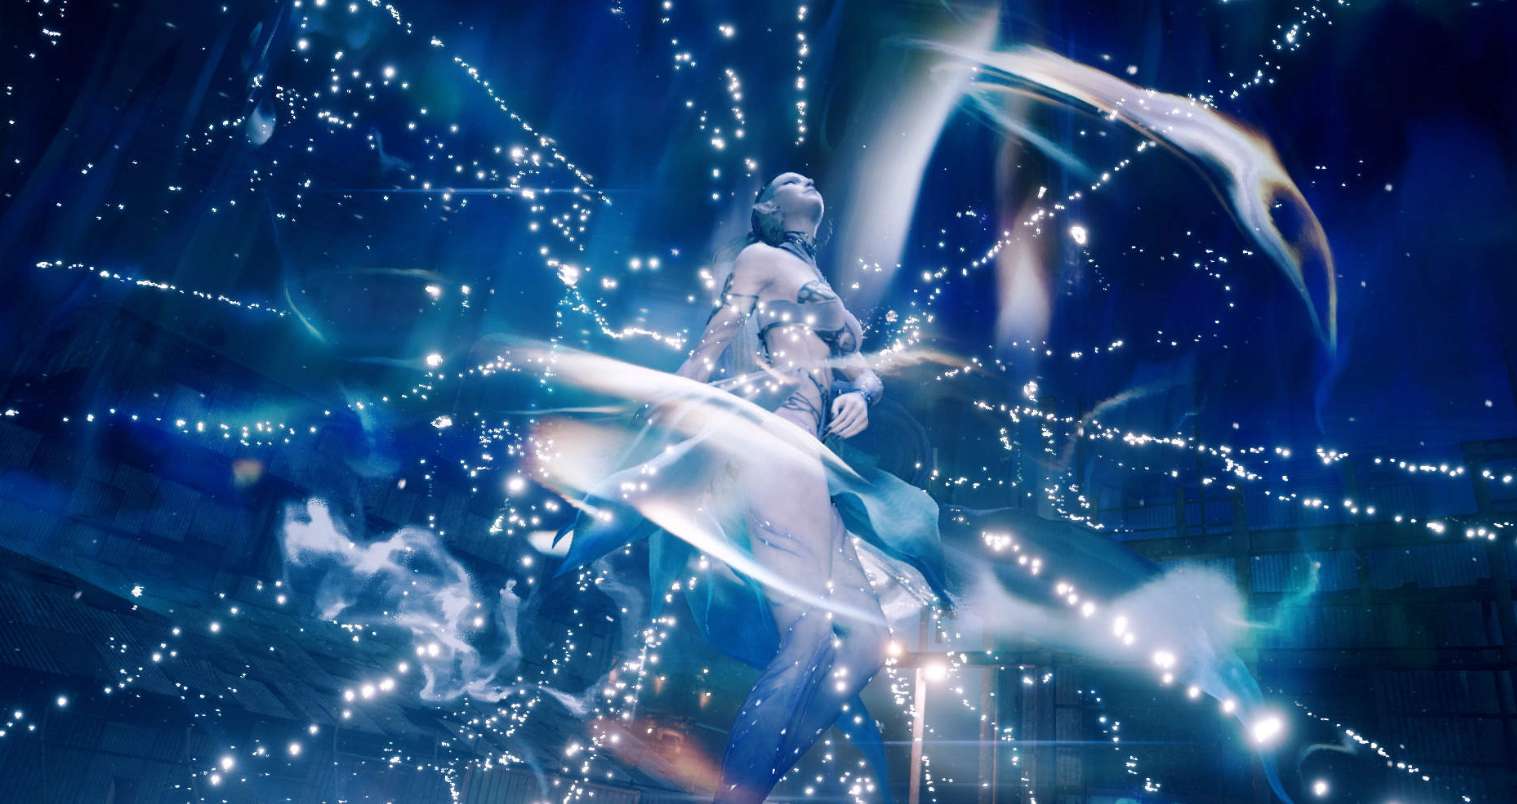 Final Fantasy VII Remake Screenshots Show The Classic Ice Summon Spell Shiva In Action